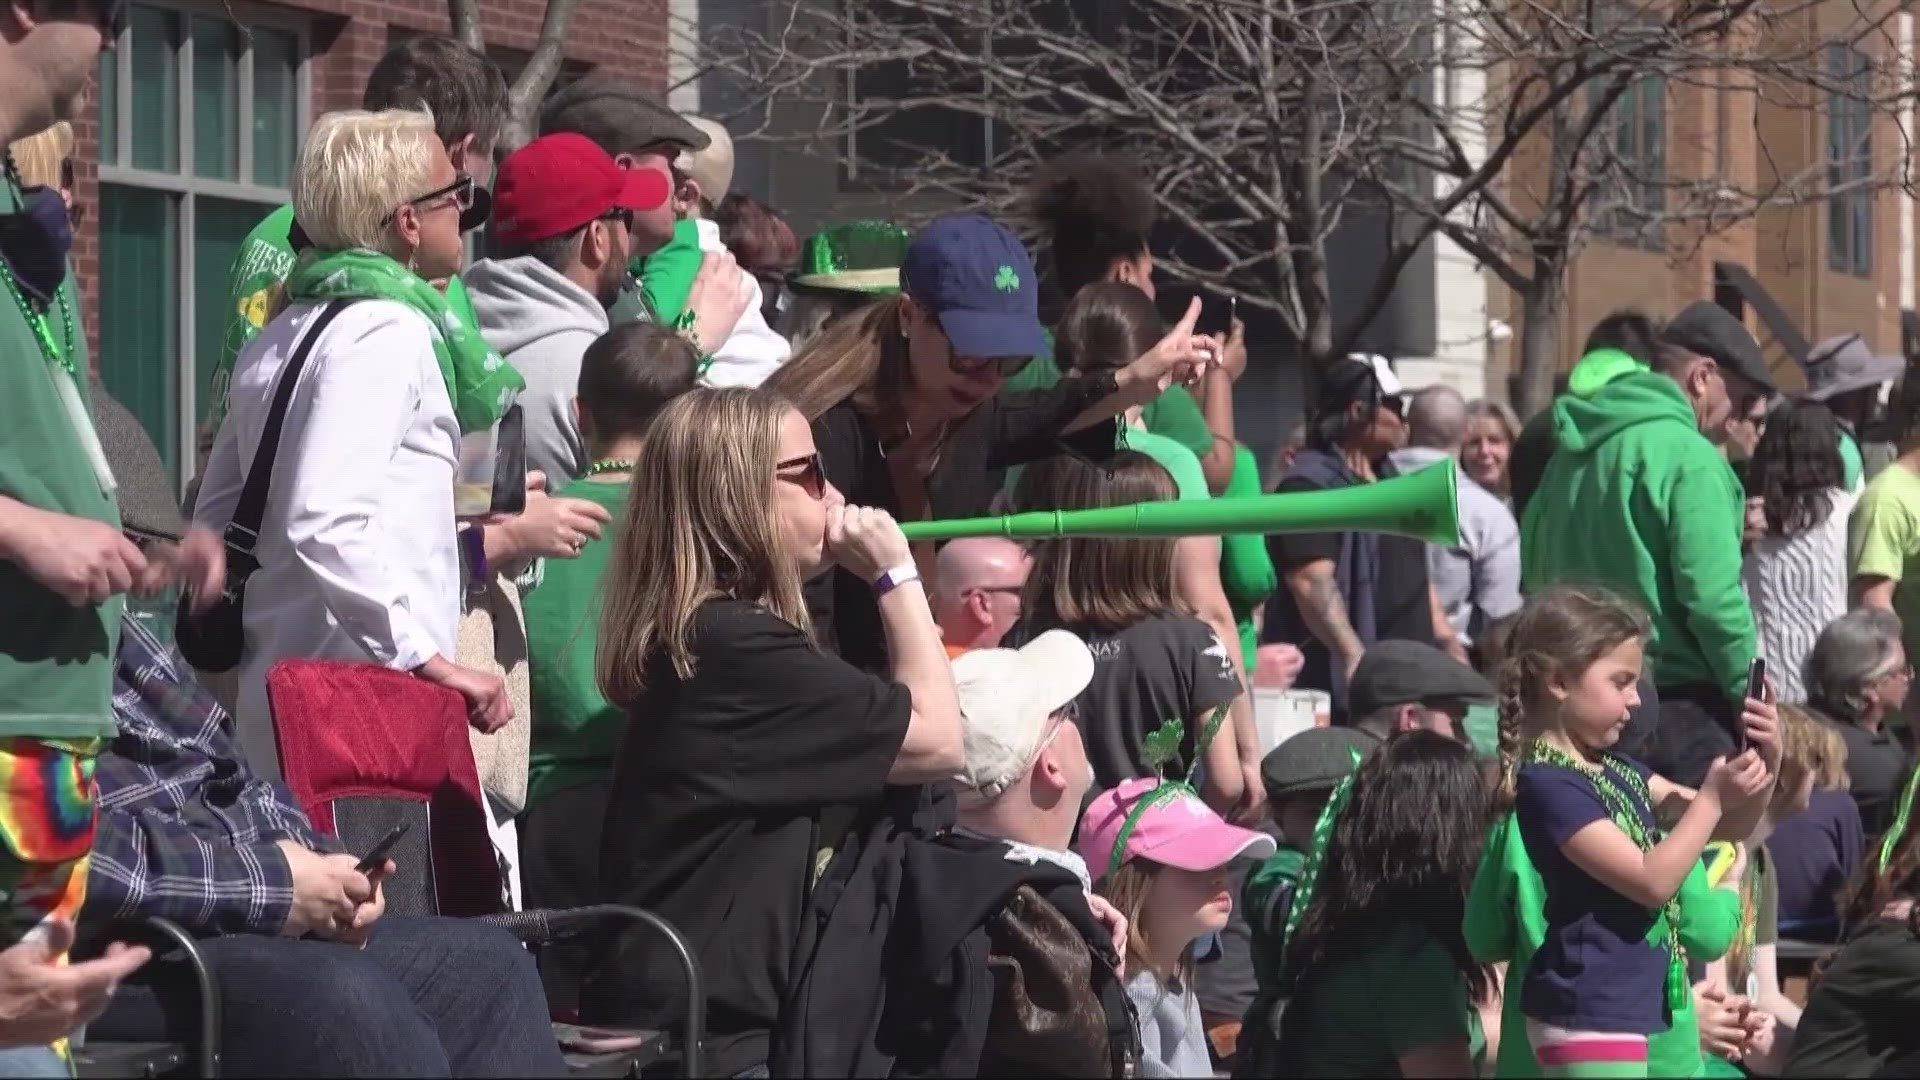 The theme for this year's Cleveland St. Patrick's Day Parade is 'A Salute to Irish American Athletes.'